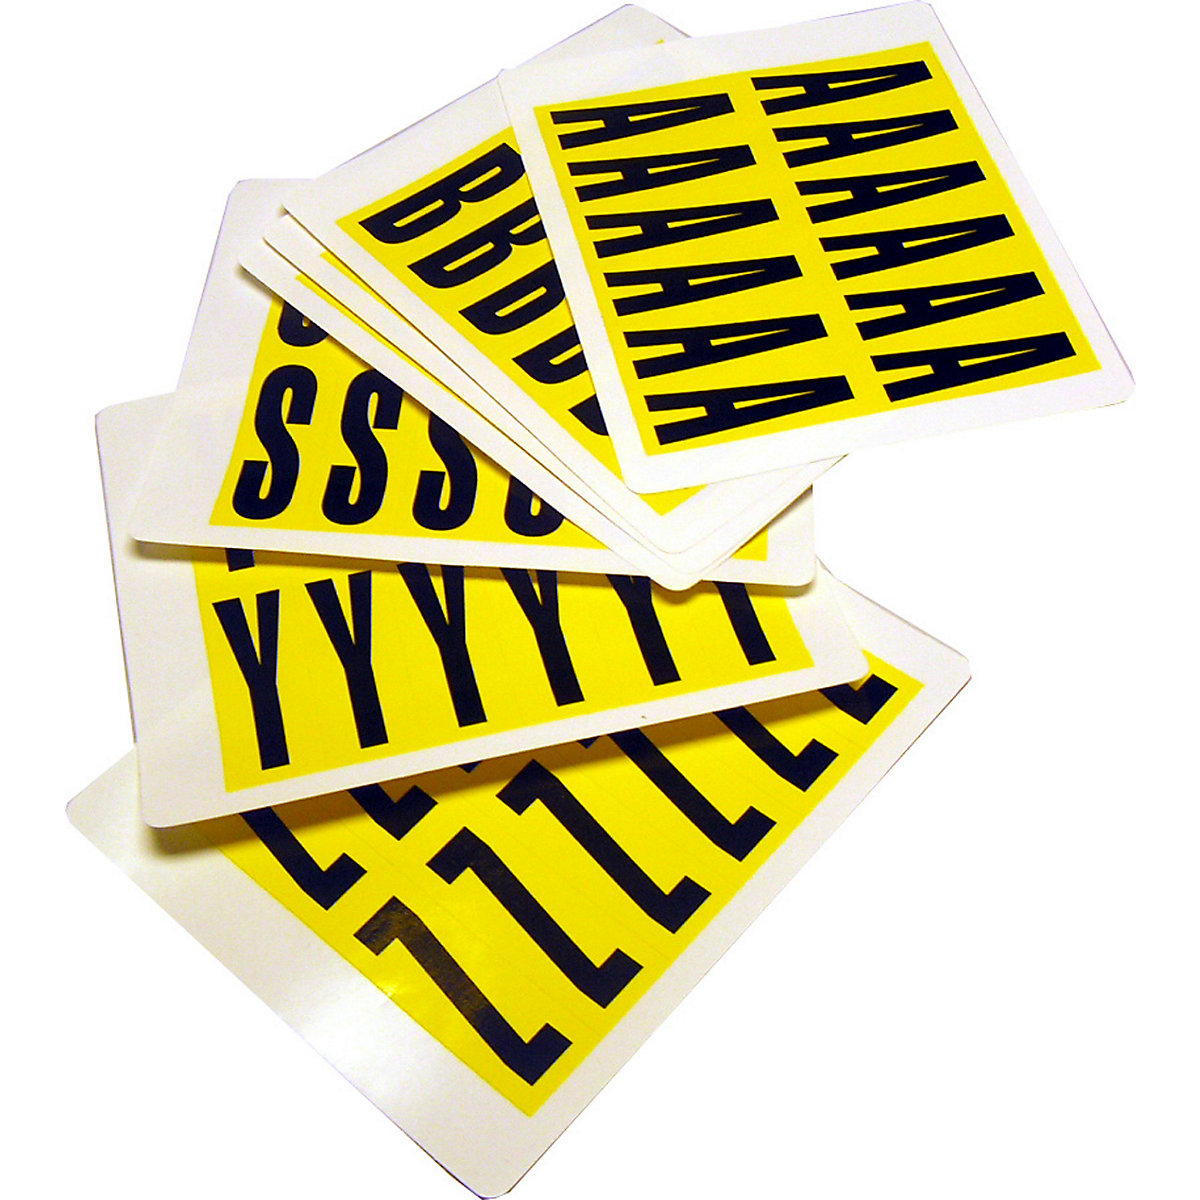 Character set, height x width 56 x 21 mm, self-adhesive letters A – Z, 26 cards-5